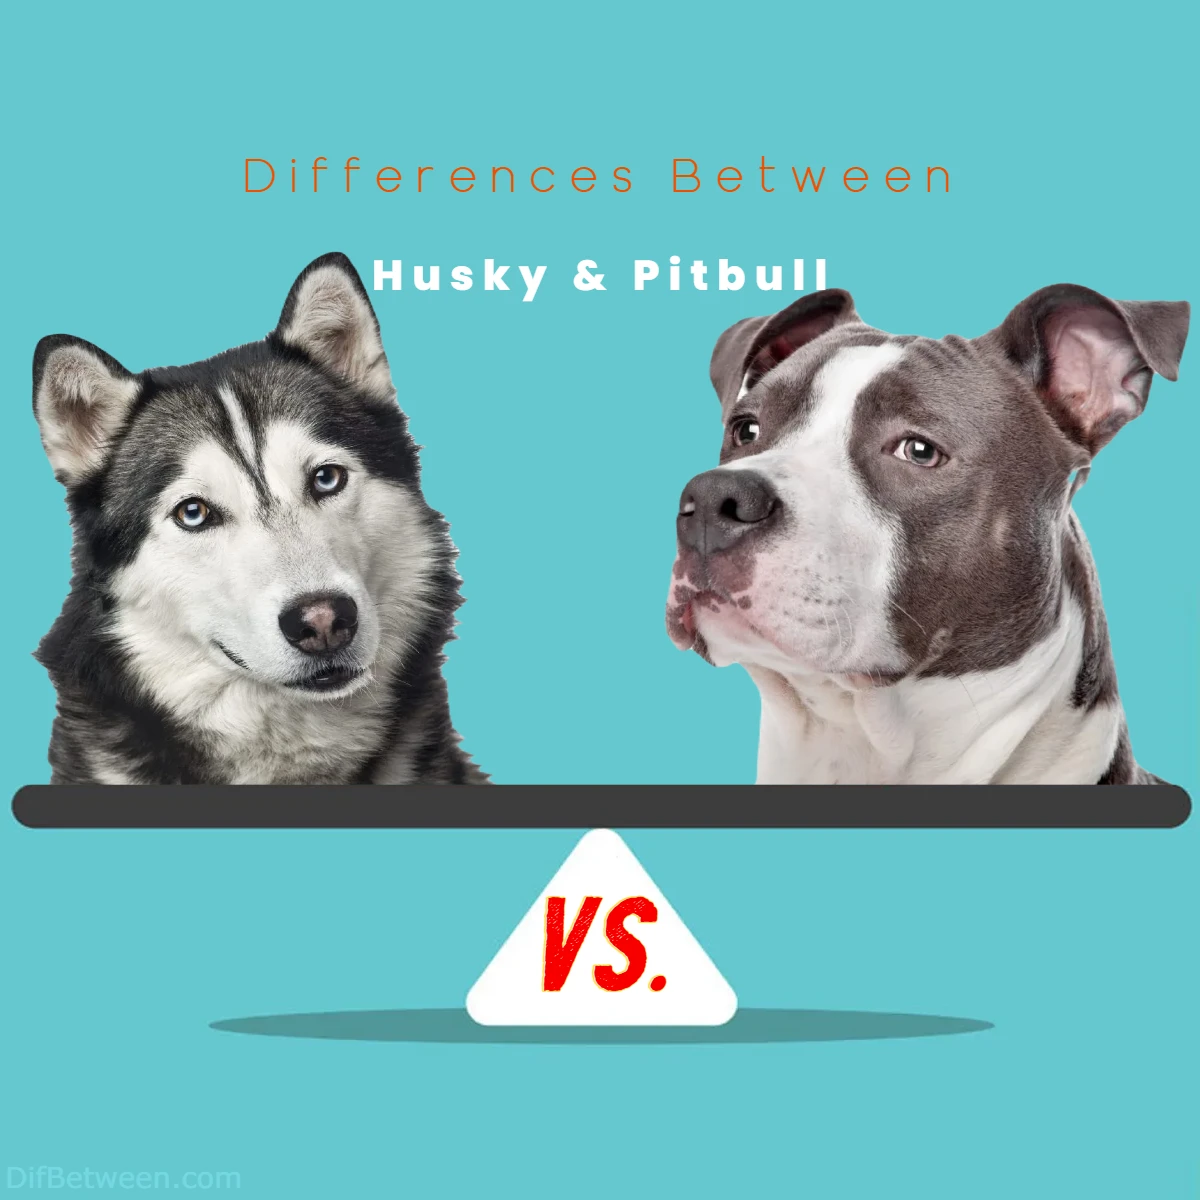 Difference Between Pitbull and Husky